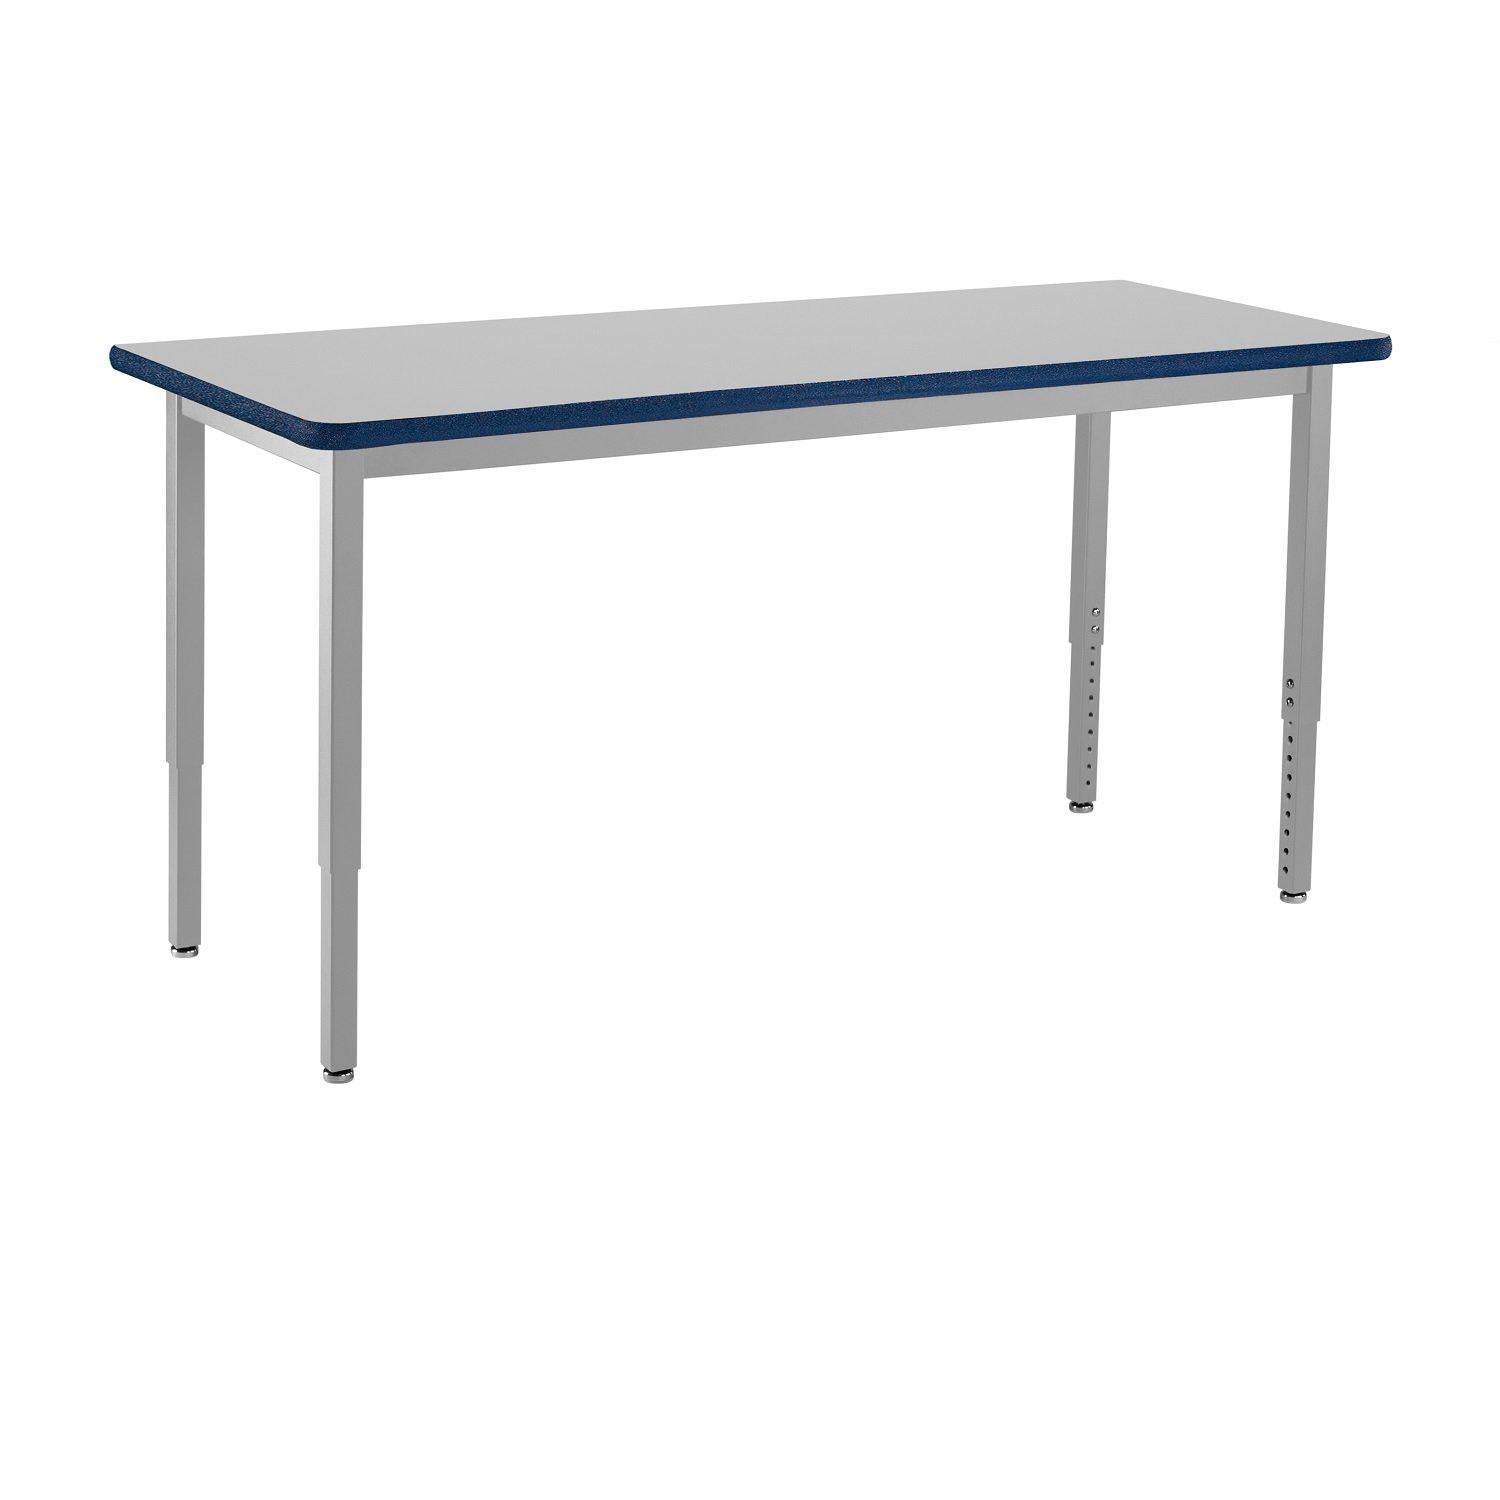 Heavy-Duty Height-Adjustable Utility Table, Soft Grey Frame, 24" x 60", Supreme High-Pressure Laminate Top with Black ProtectEdge